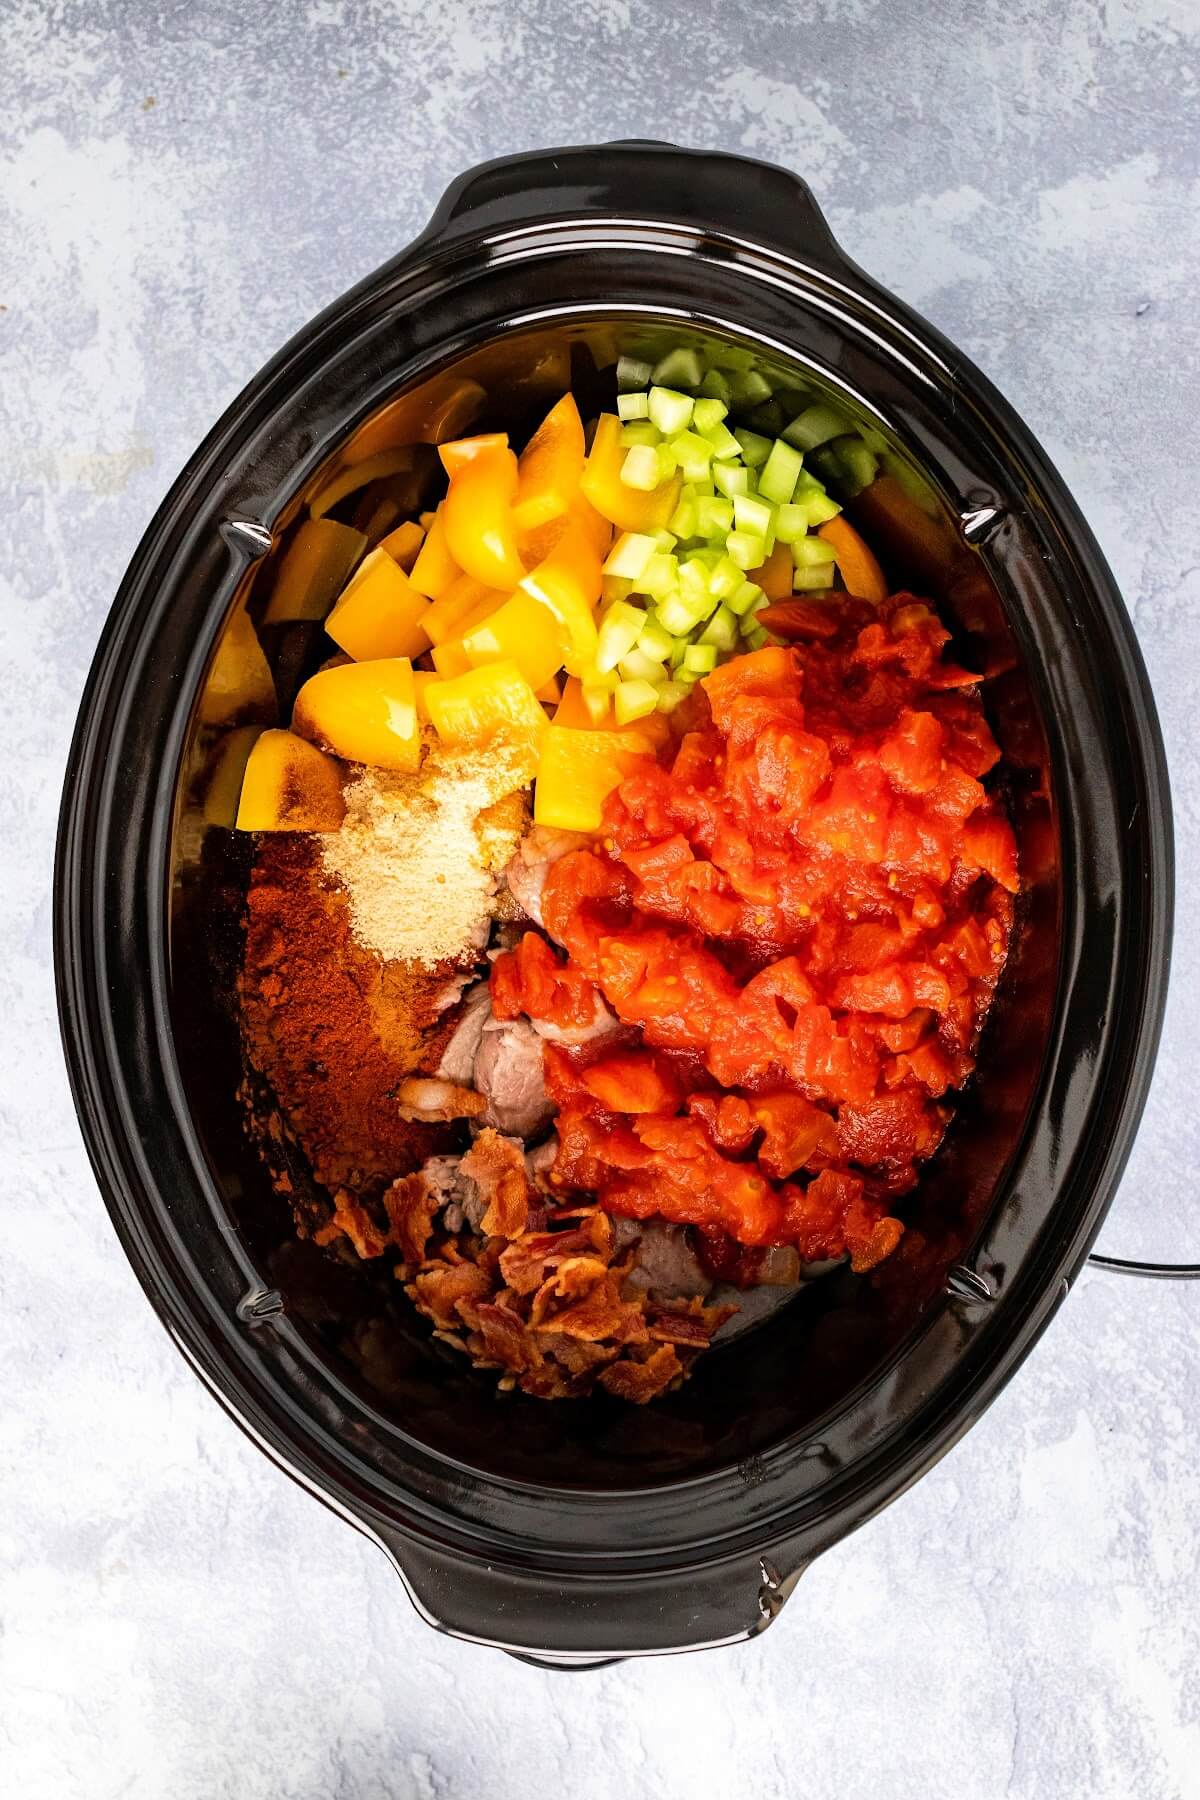 Slow cooker filled with canned tomatoes, chopped yellow bell peppers, chopped celery, chopped cooked bacon and lots of spices and herbs on top of browned stew meat.